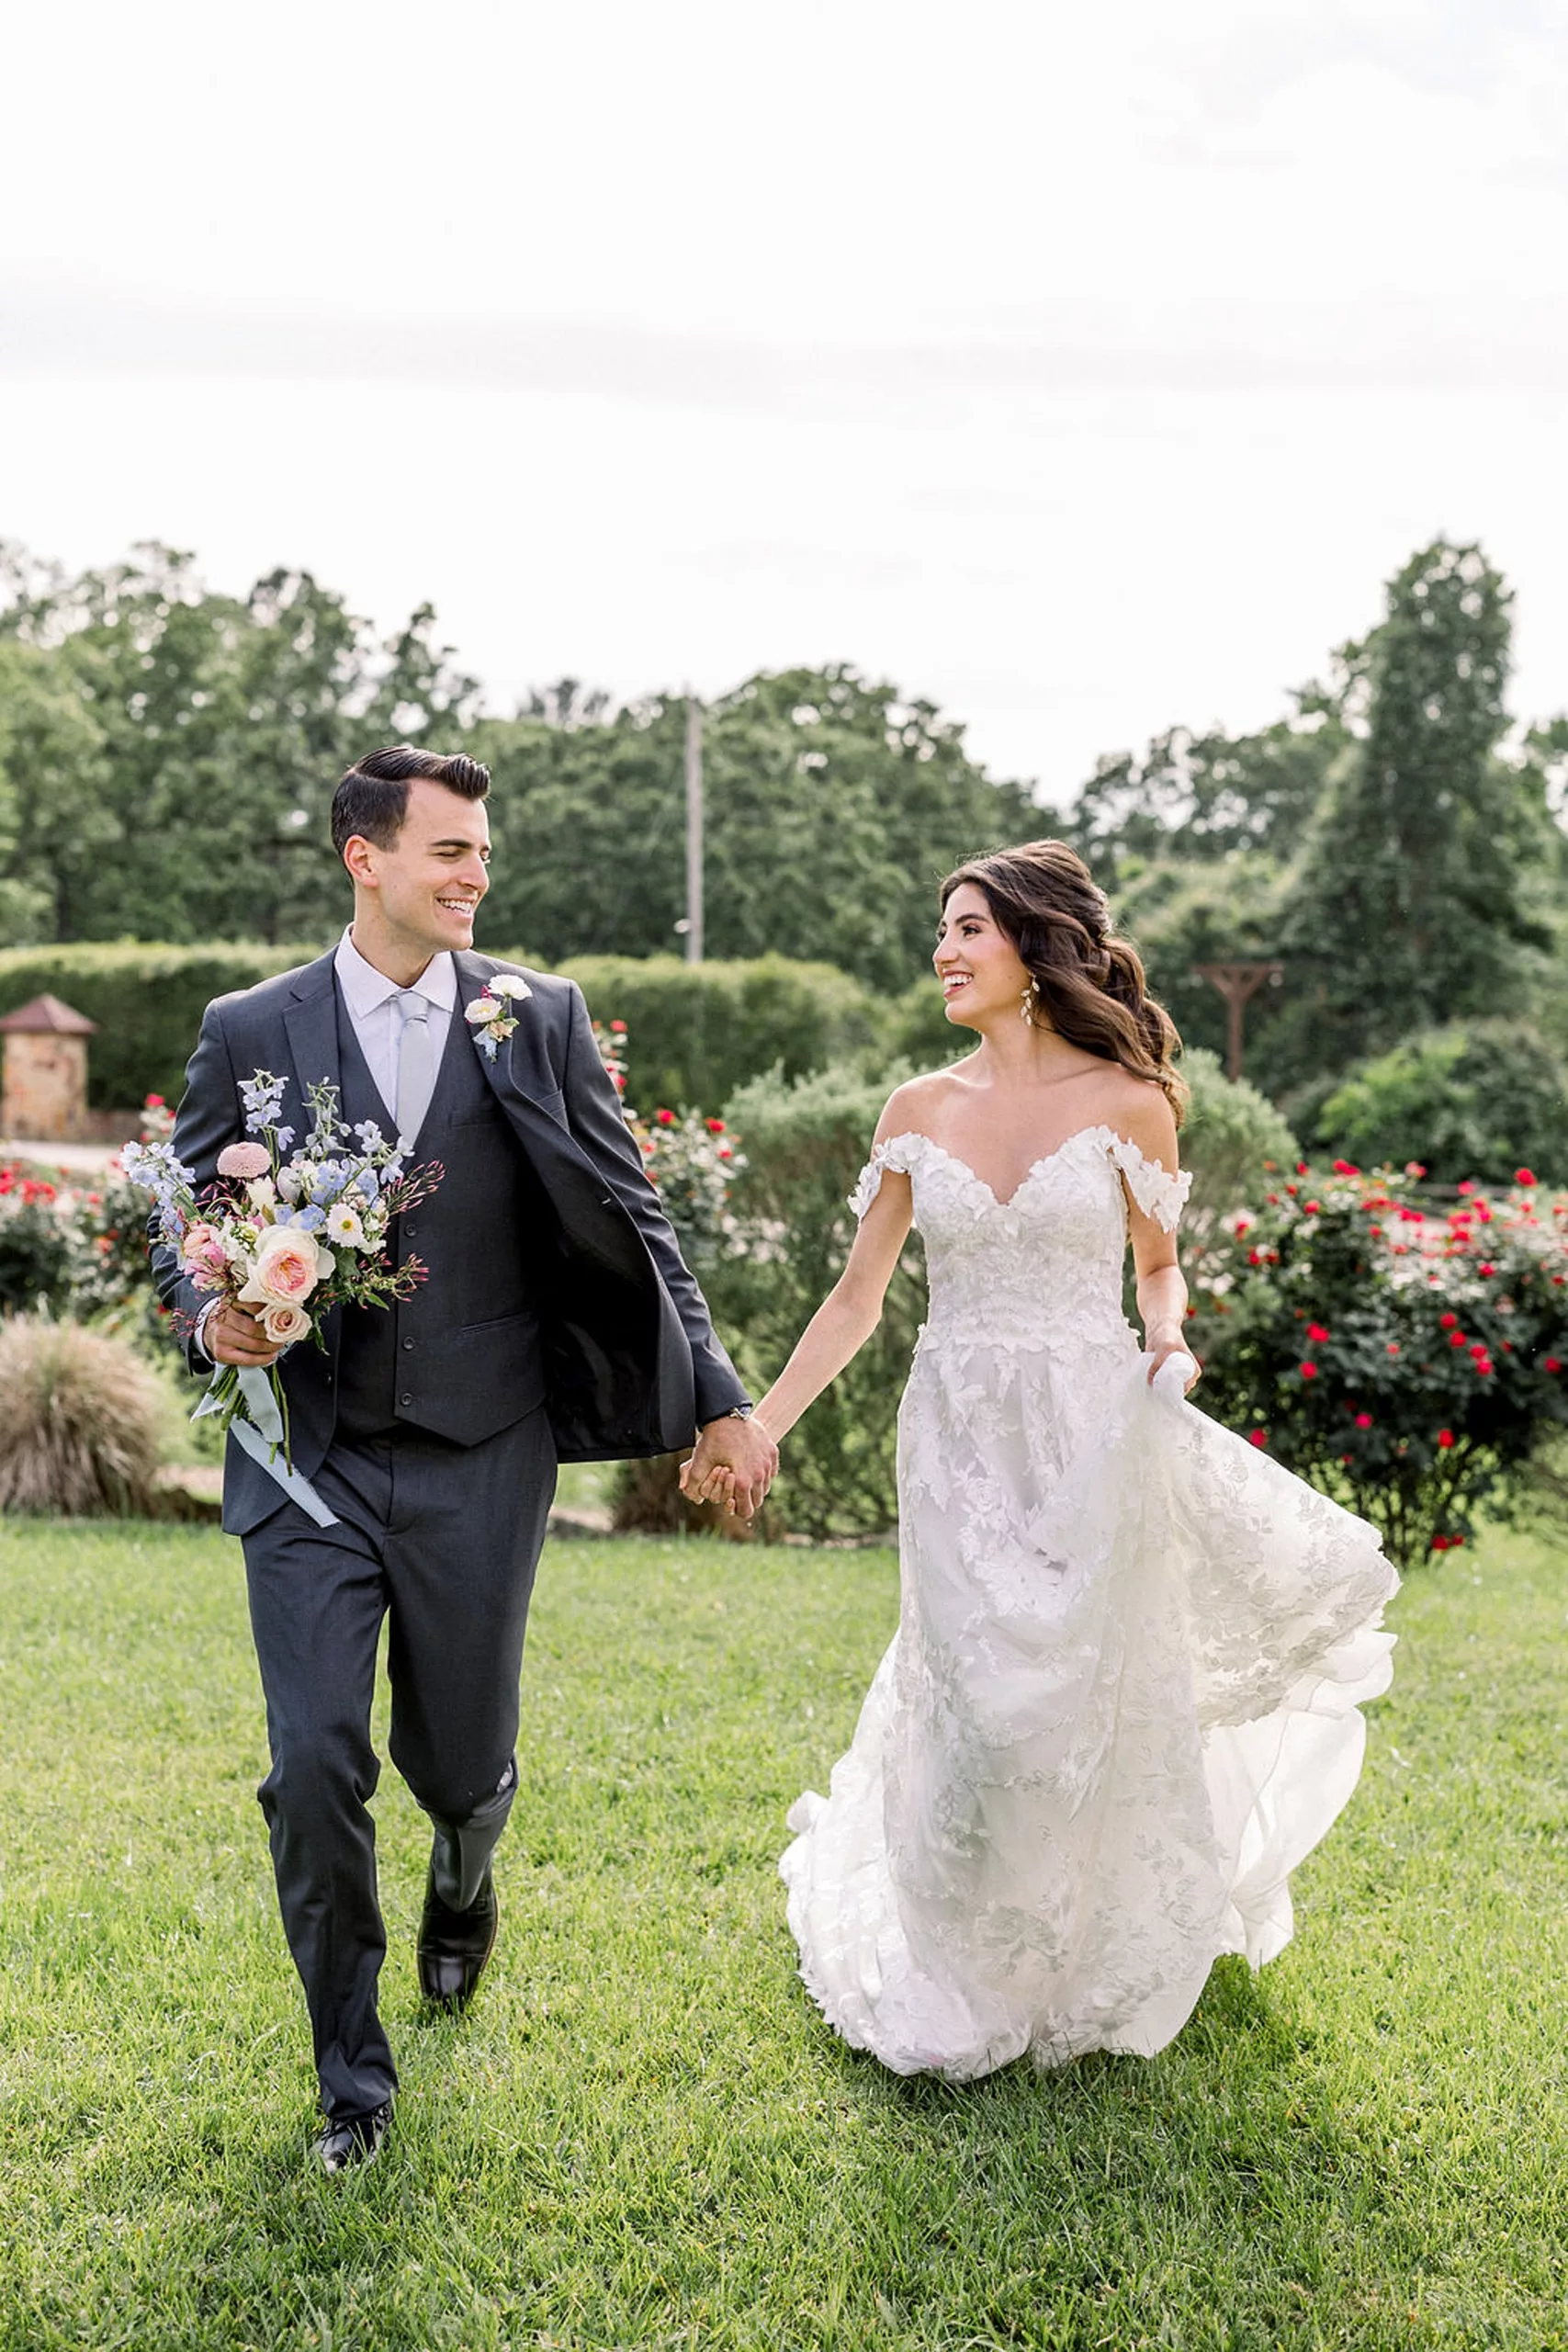 A bride and groom walk hand in hand through a rose garden at an iron manor wedding as the groom in a grey suit holds the bouquet